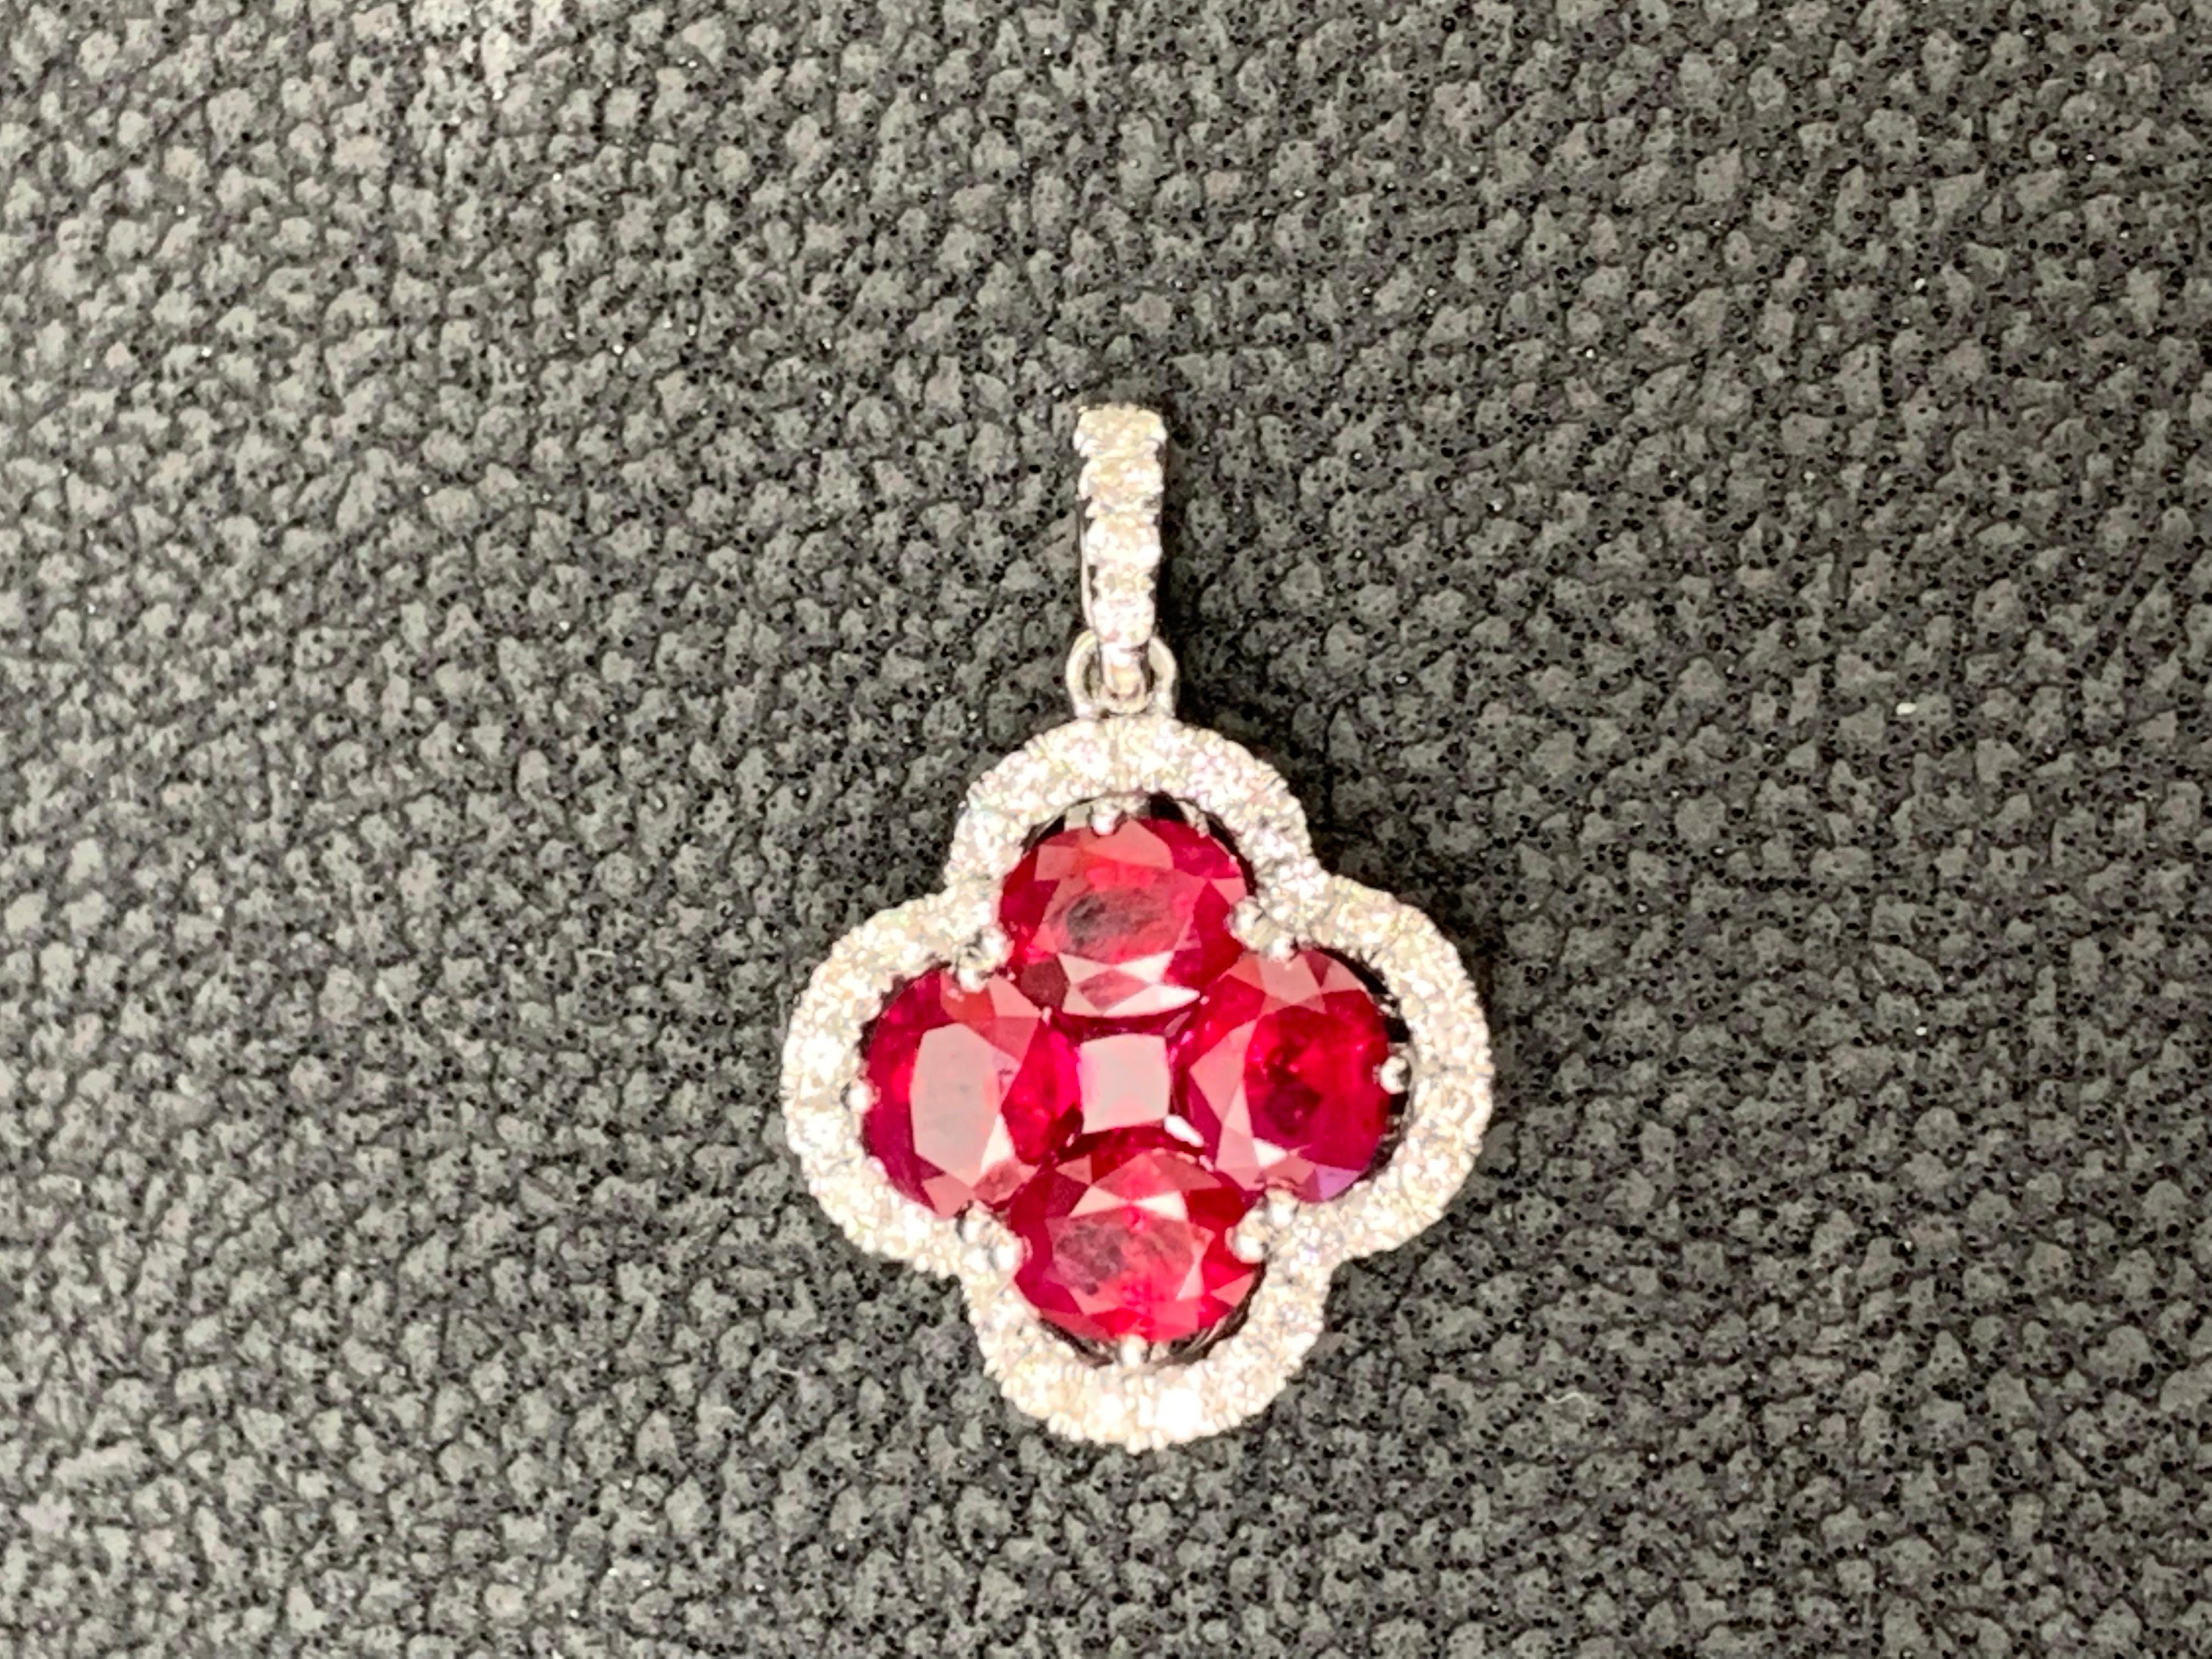 Showcasing flower design pendant with 4 oval shape Rubies weighing 1.22 carats total and 1 round shape Ruby weighing 0.13 carat, accented by a row of 33 round brilliant diamonds. Diamonds weigh 0.25 carats total. Set in a polished 18K white gold